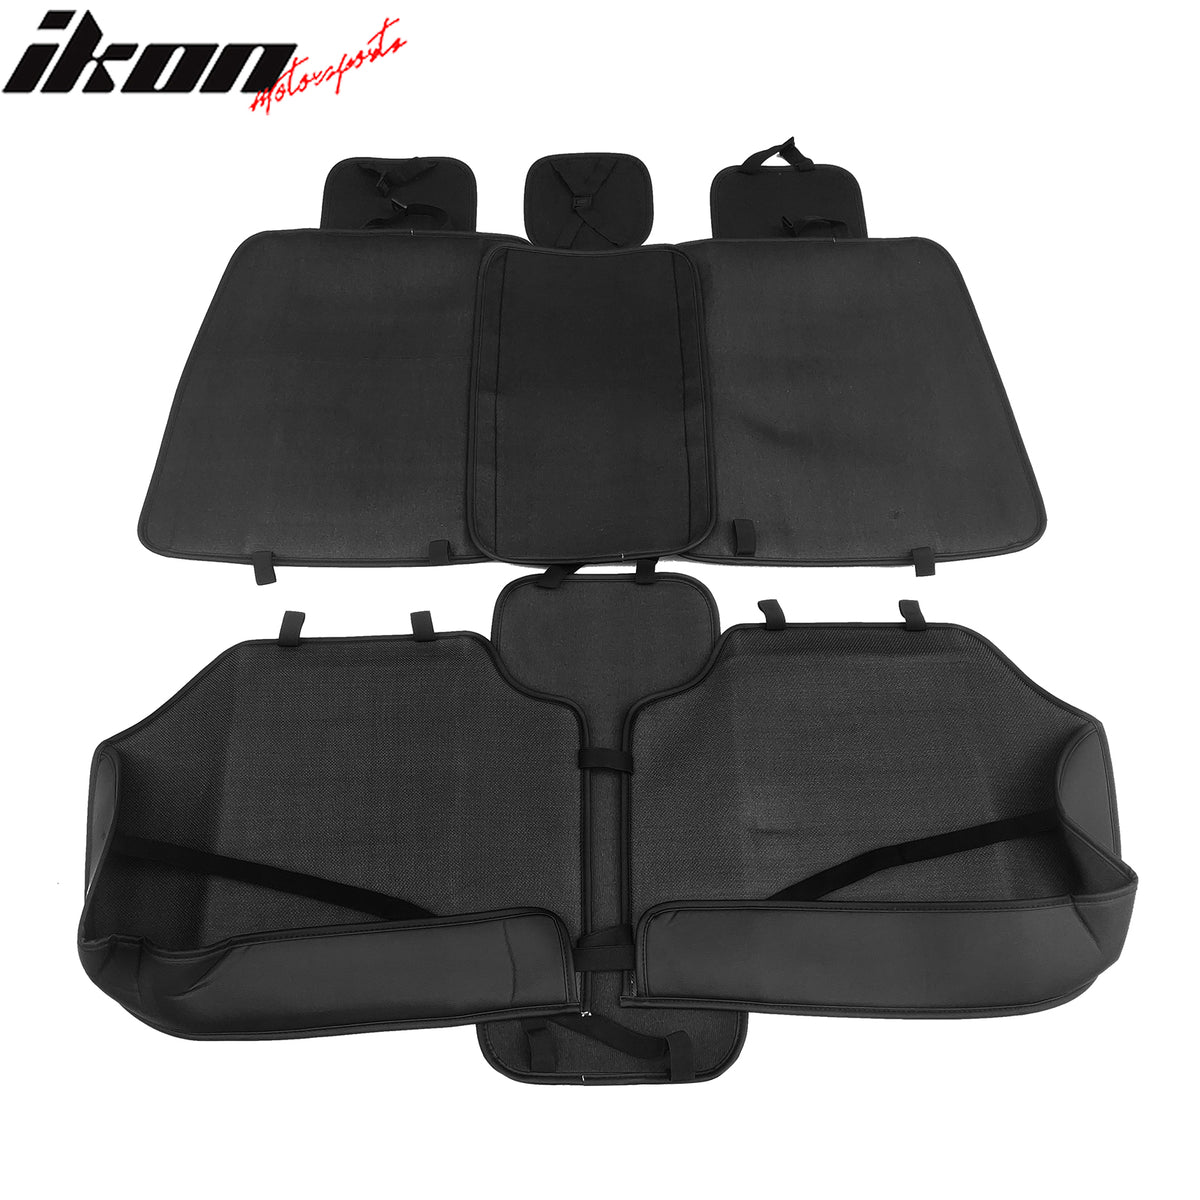 Fits Universal Car Seat Covers Cushion Protectors PU Leather 01 Style